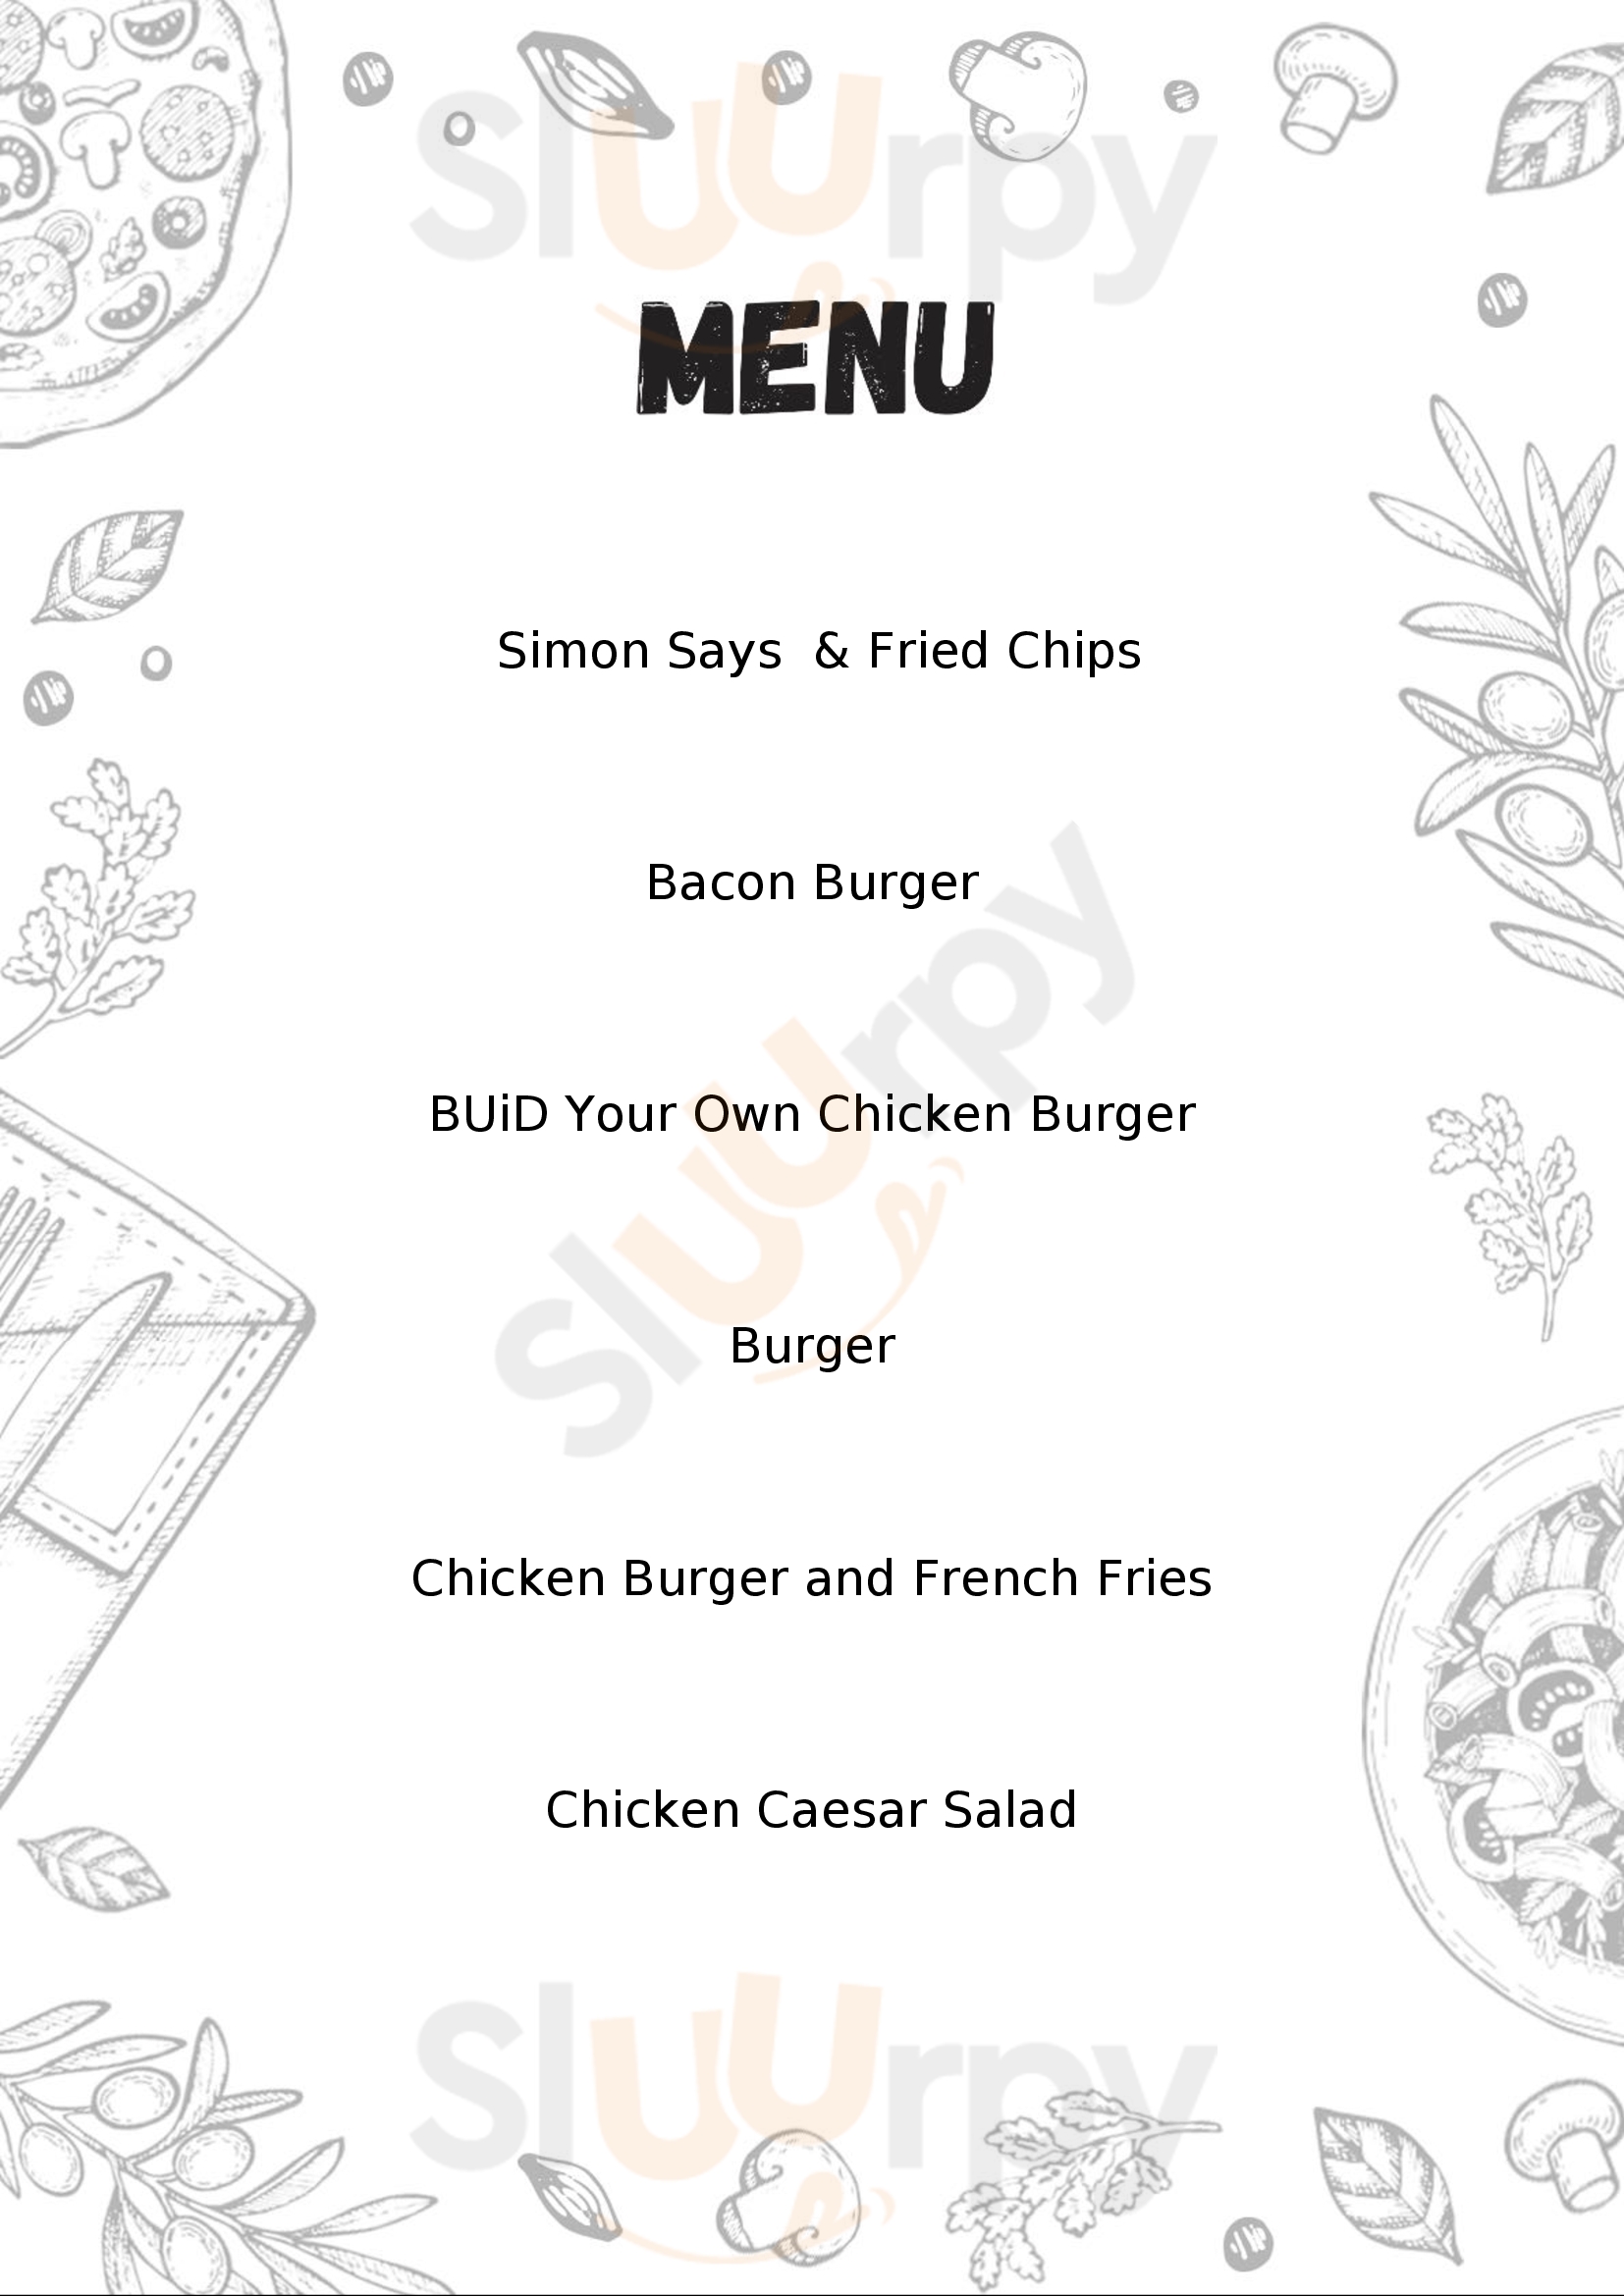 Grill'd Rundle St Adelaide Menu - 1